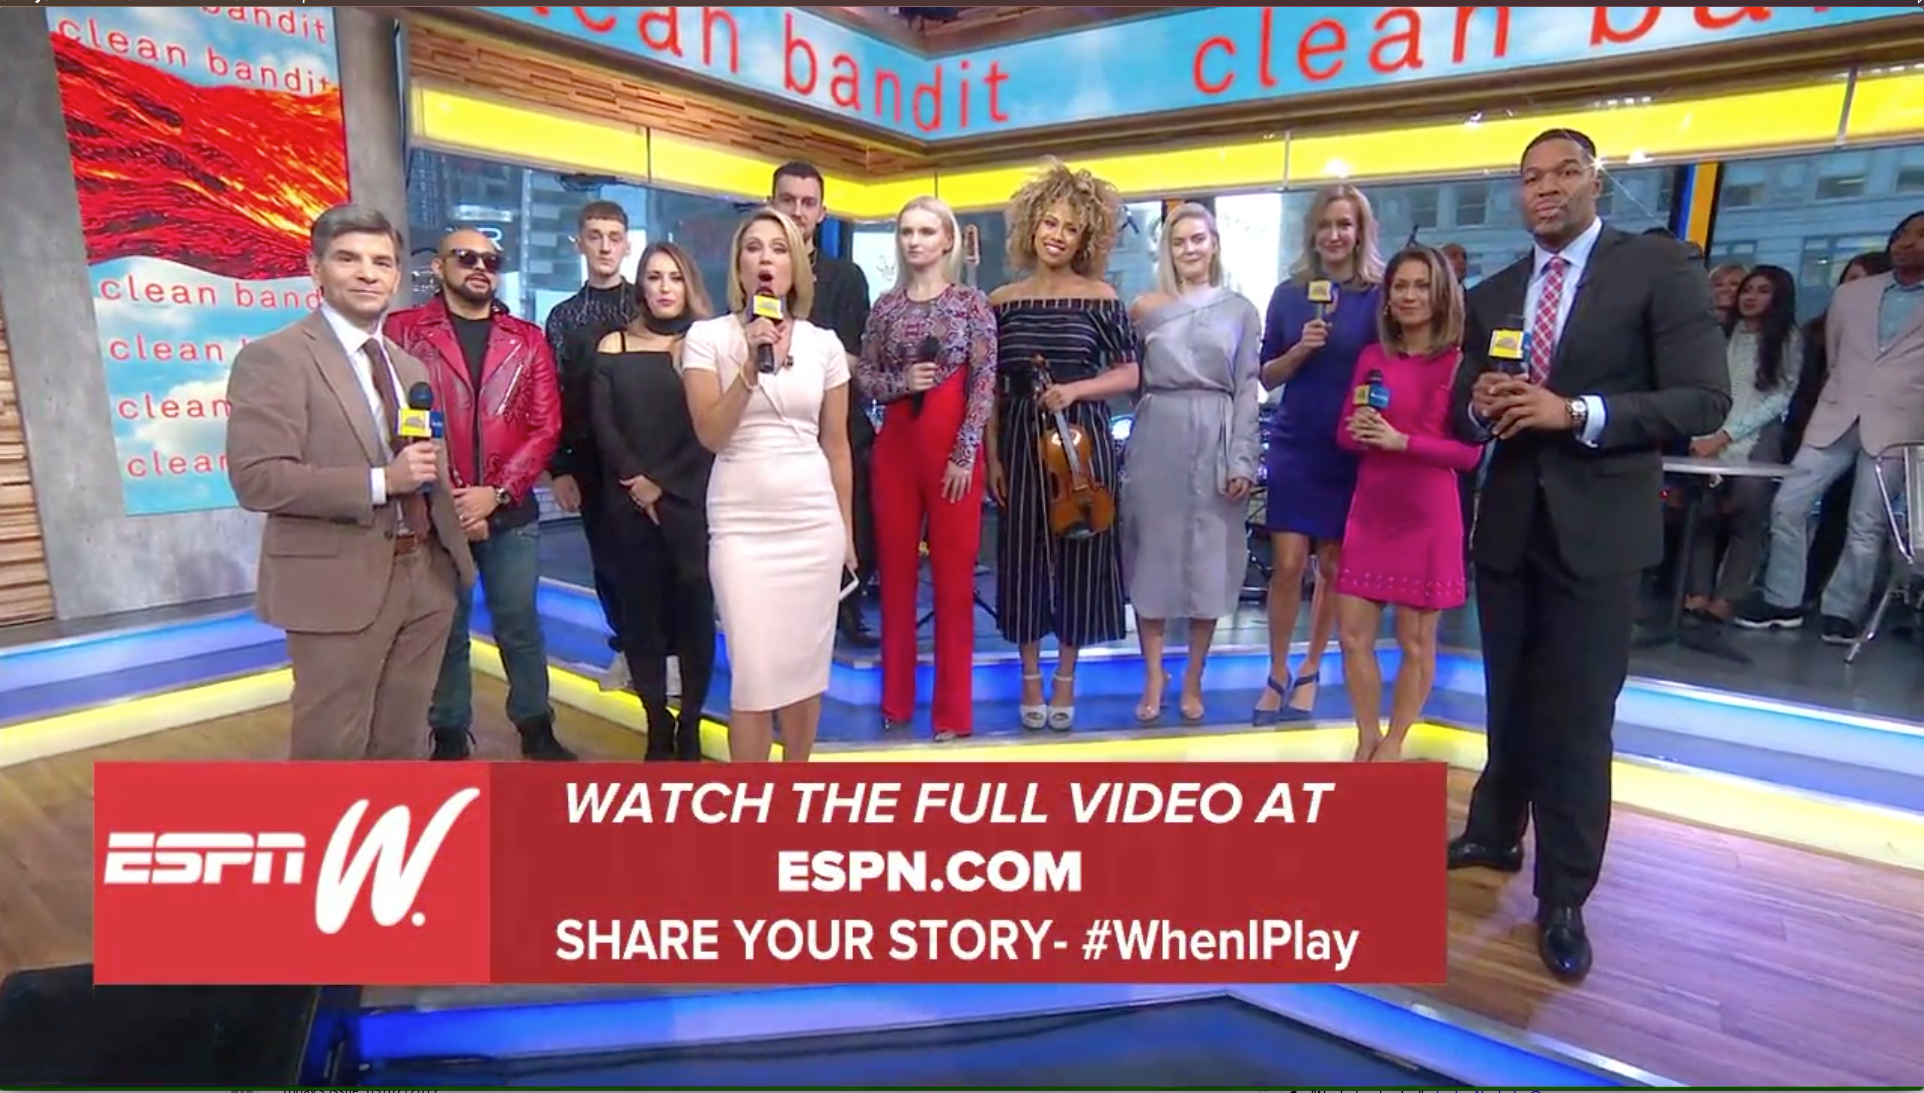 Earlier this month, the cast of ABC's Good Morning America helped promote espnW's #WhenIPlay video. 